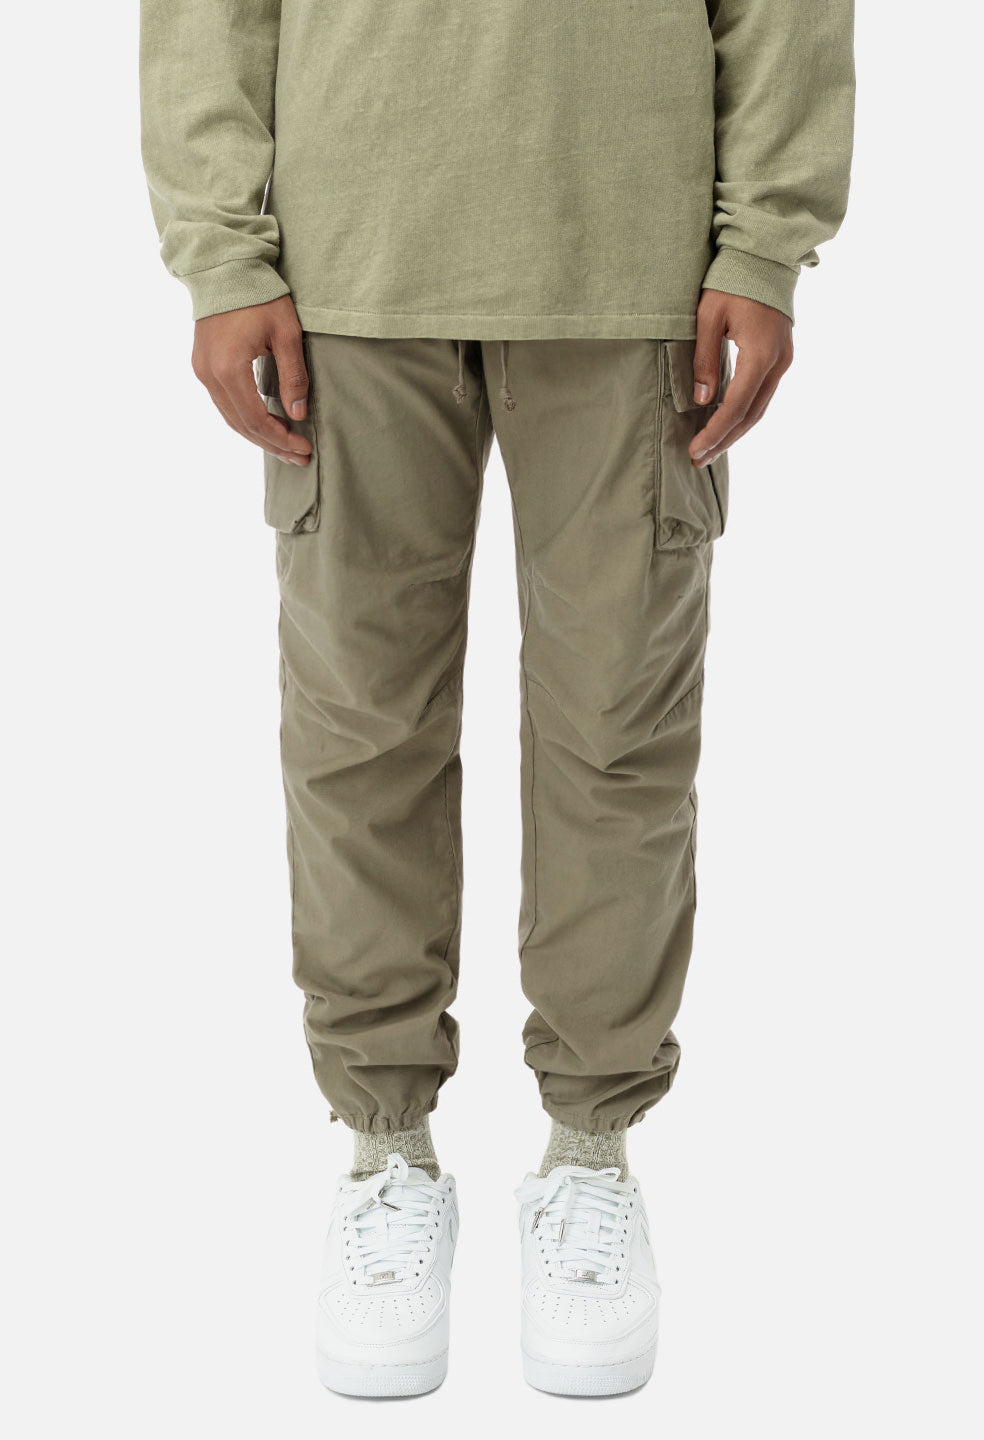 khaki pants with air force ones